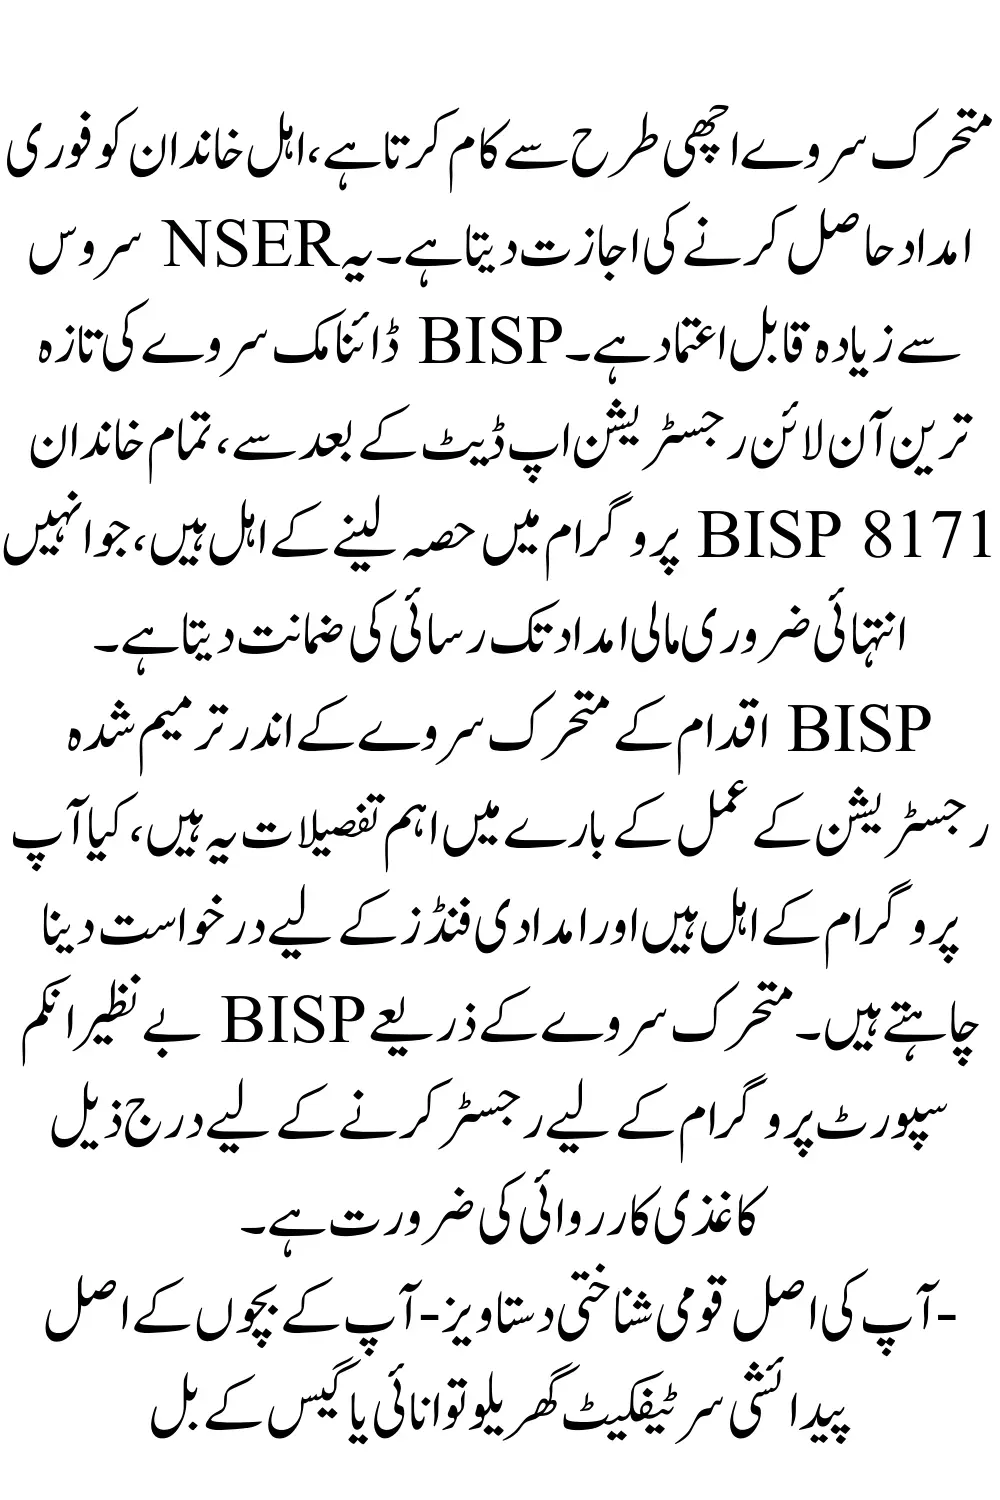 BISP Dynamic Survey Announced By Government For Poor Families In Pakistan 